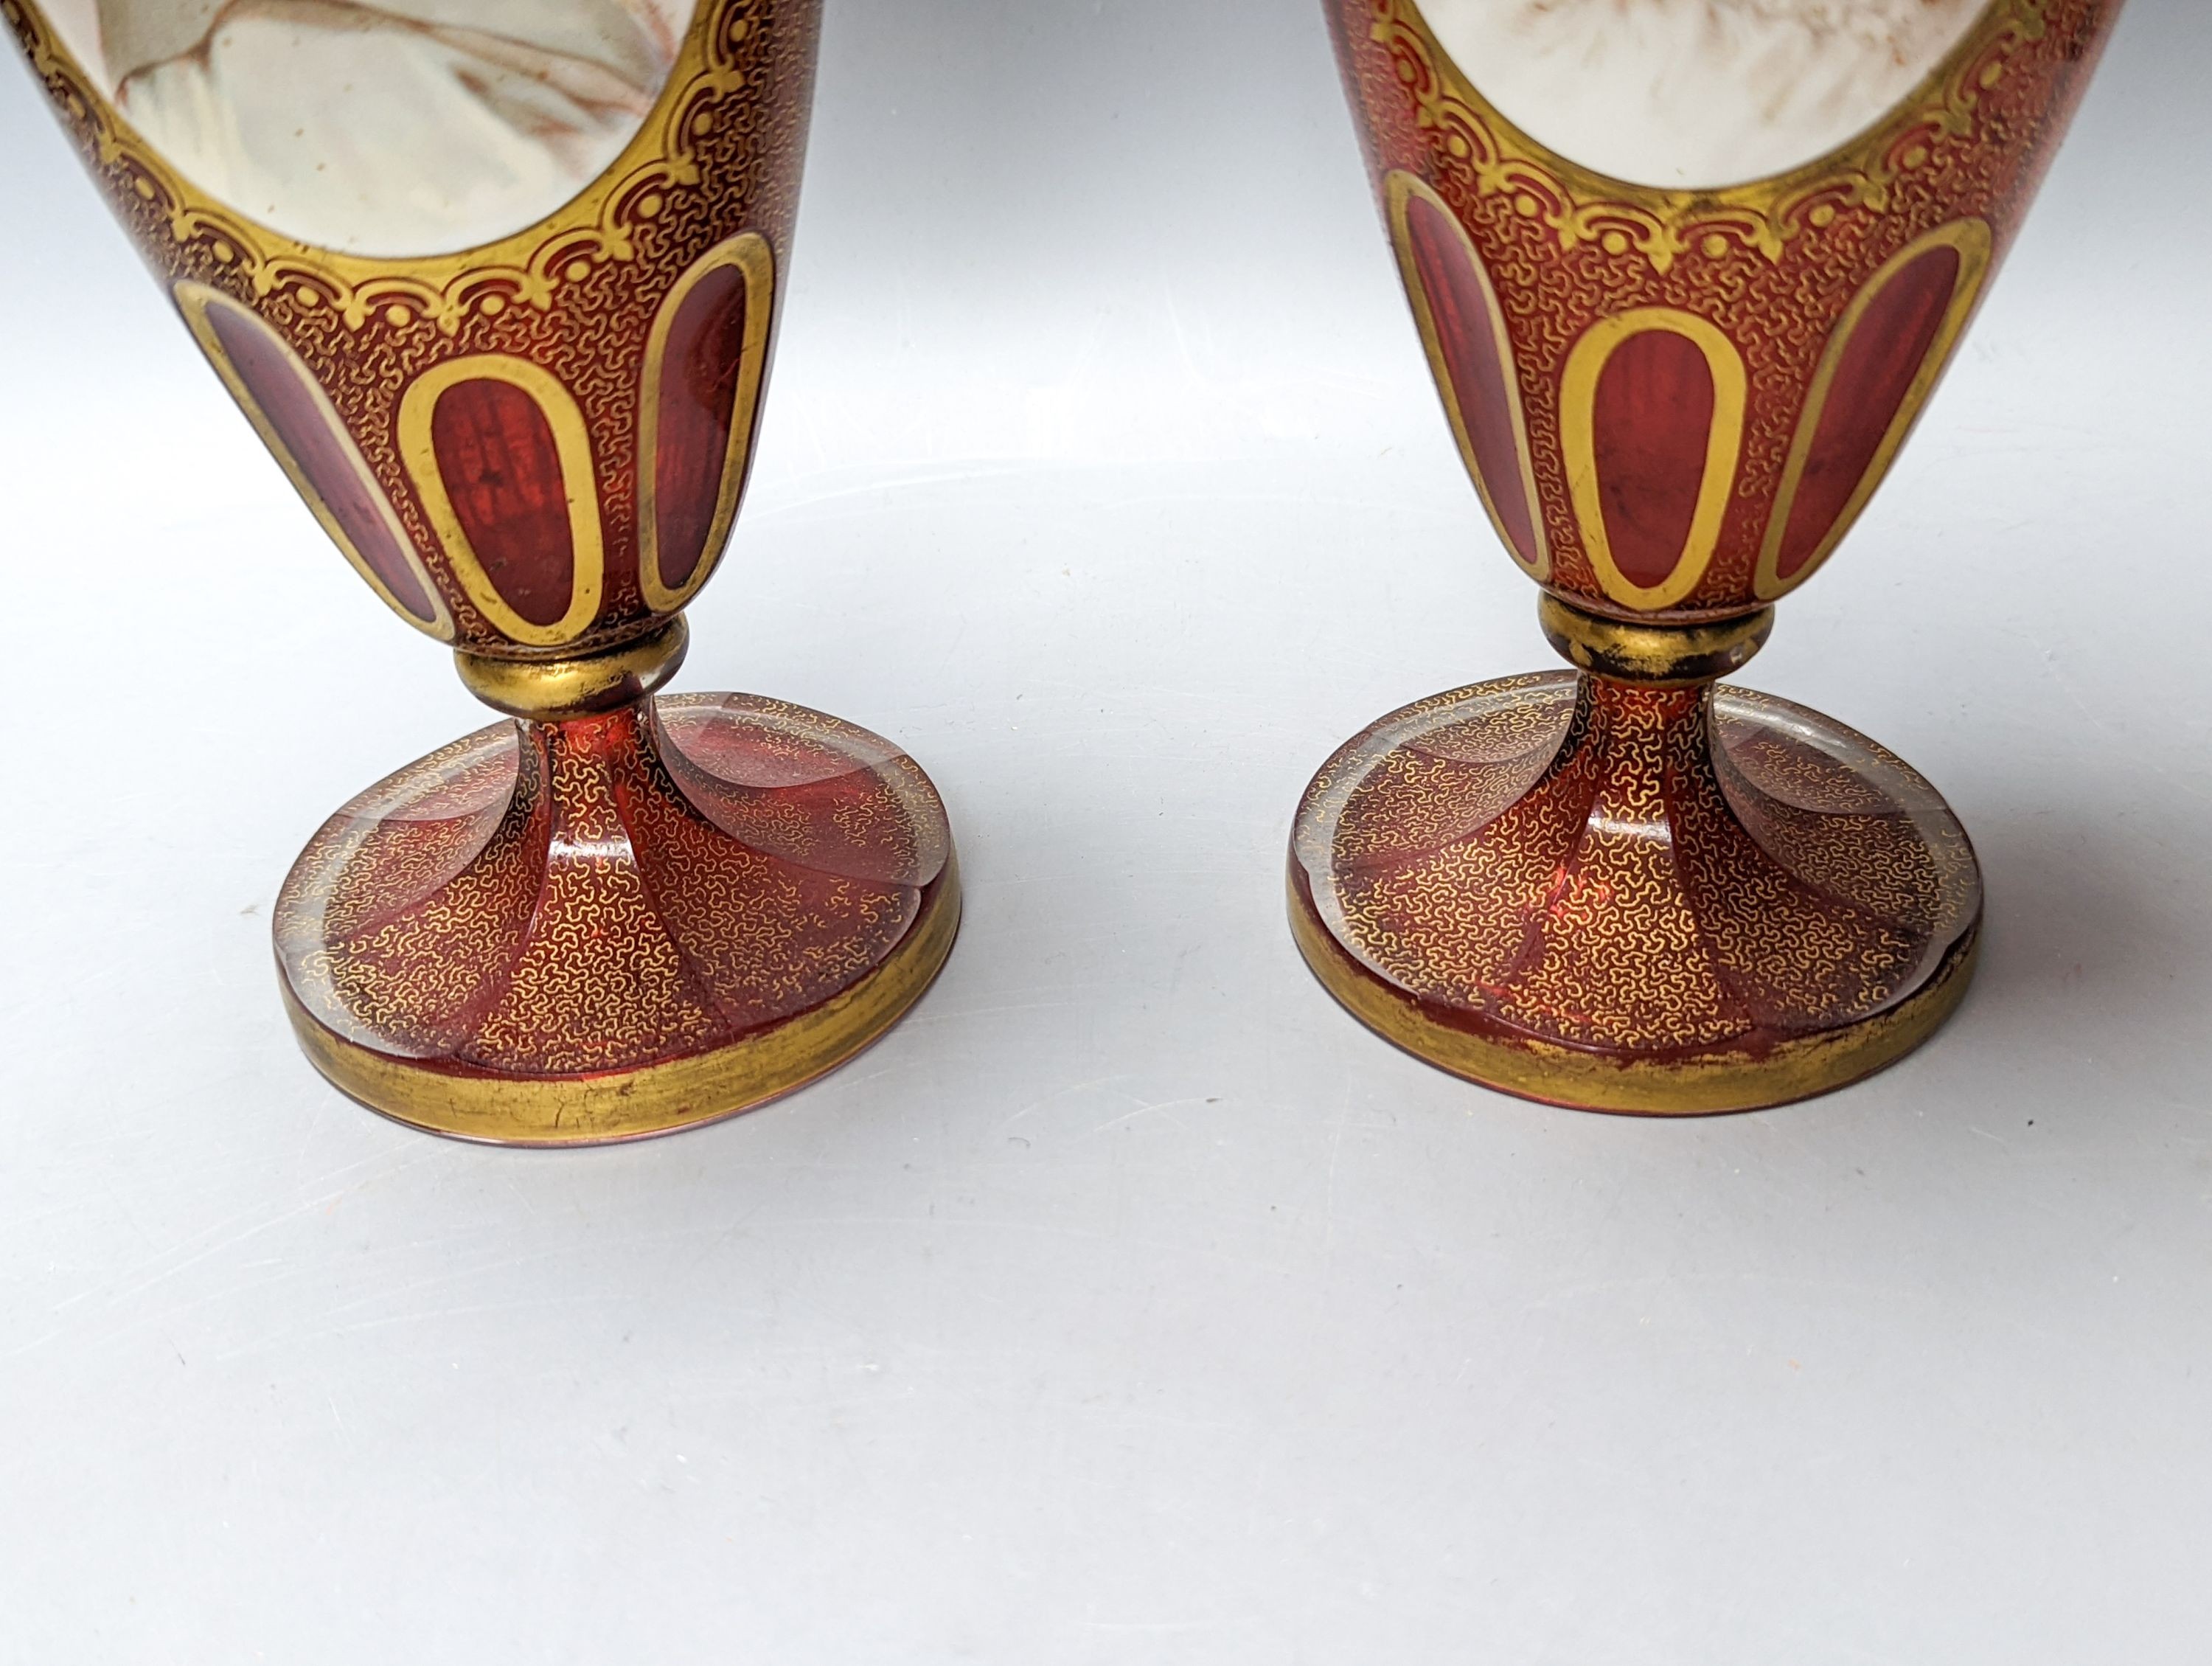 A pair of Bohemian enamelled and overlaid cranberry glass vases, 19th century 35cm